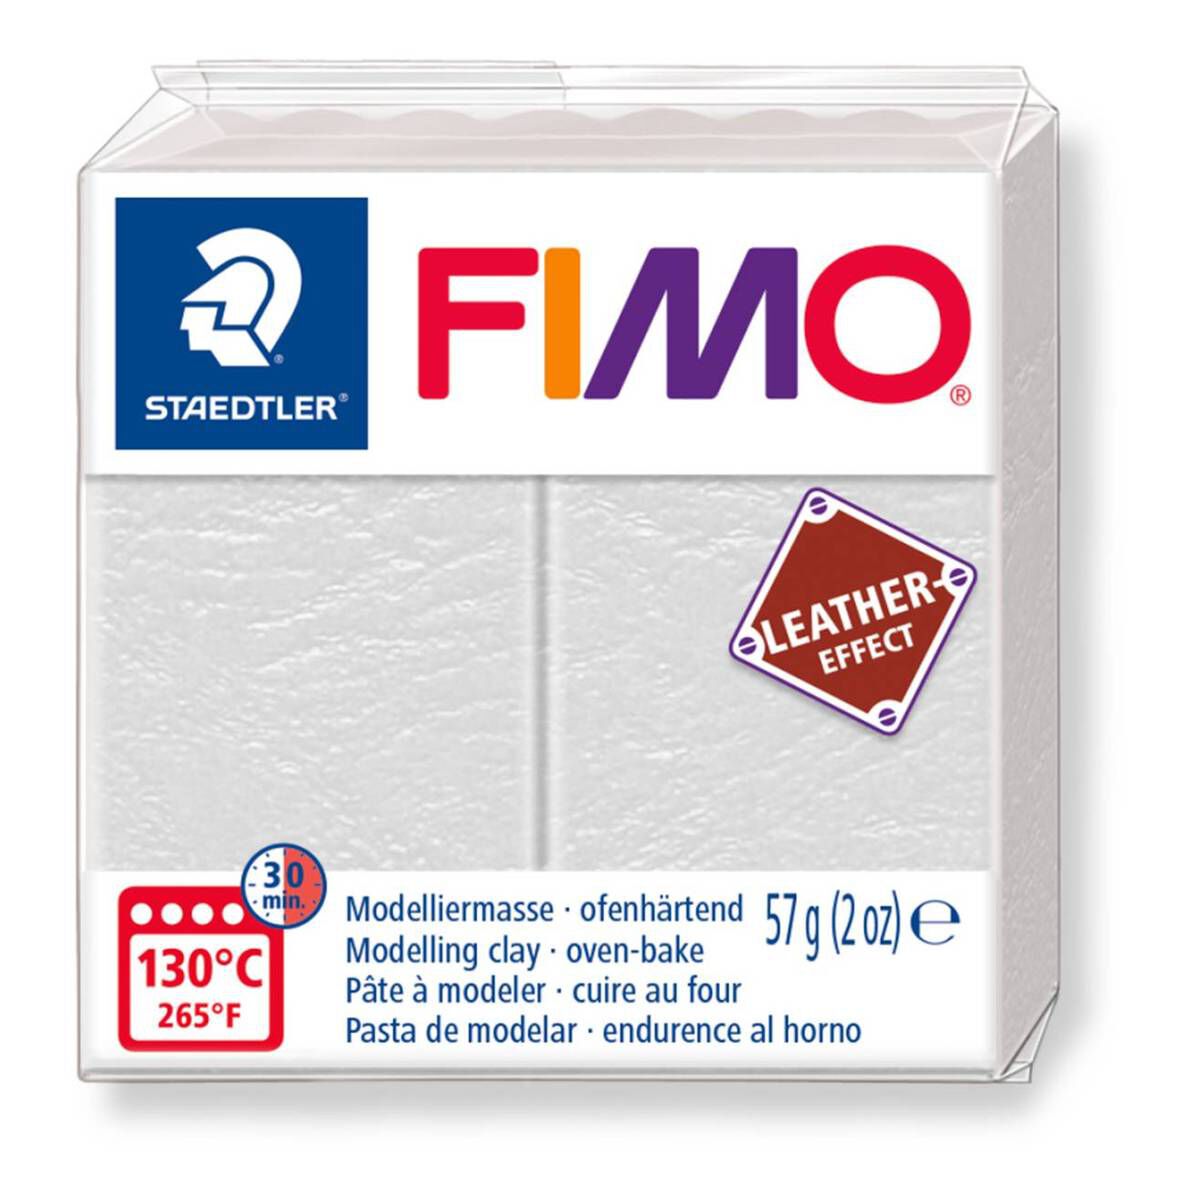 Buy 5 Get 1 Free FIMO FIMO Leather Effect Polymer Modelling Clay Oven Bake 